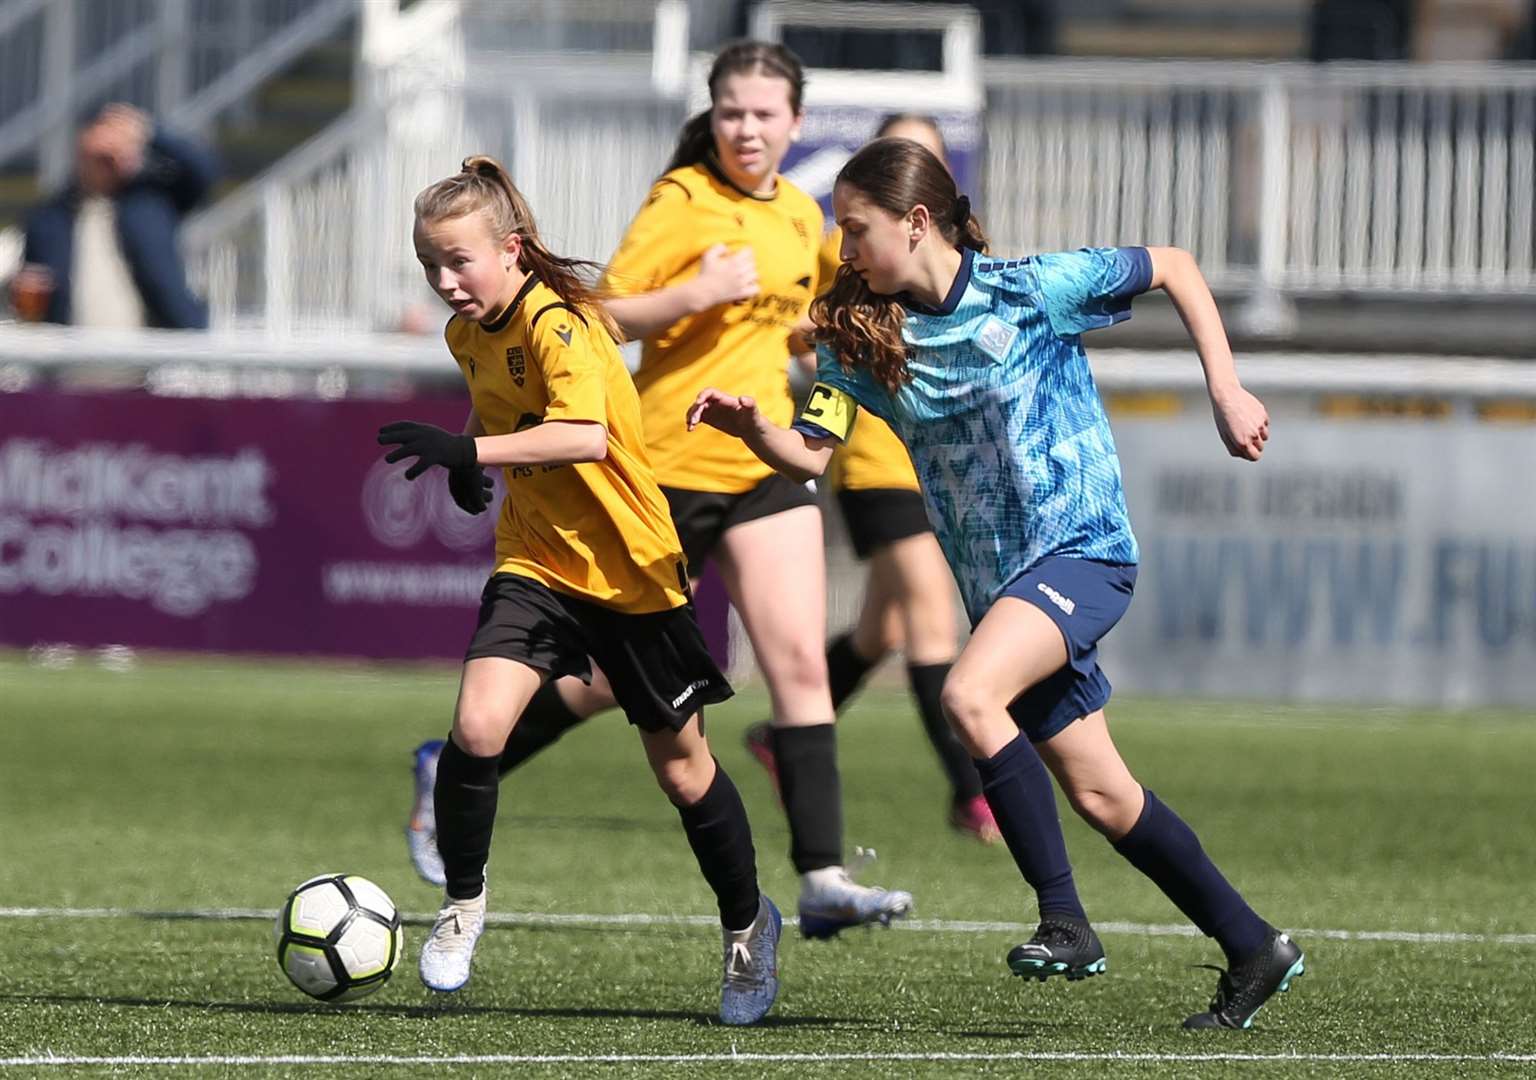 Maidstone United under-14s (amber) on the ball against London City Lionesses under-14s. Picture: PSP Images